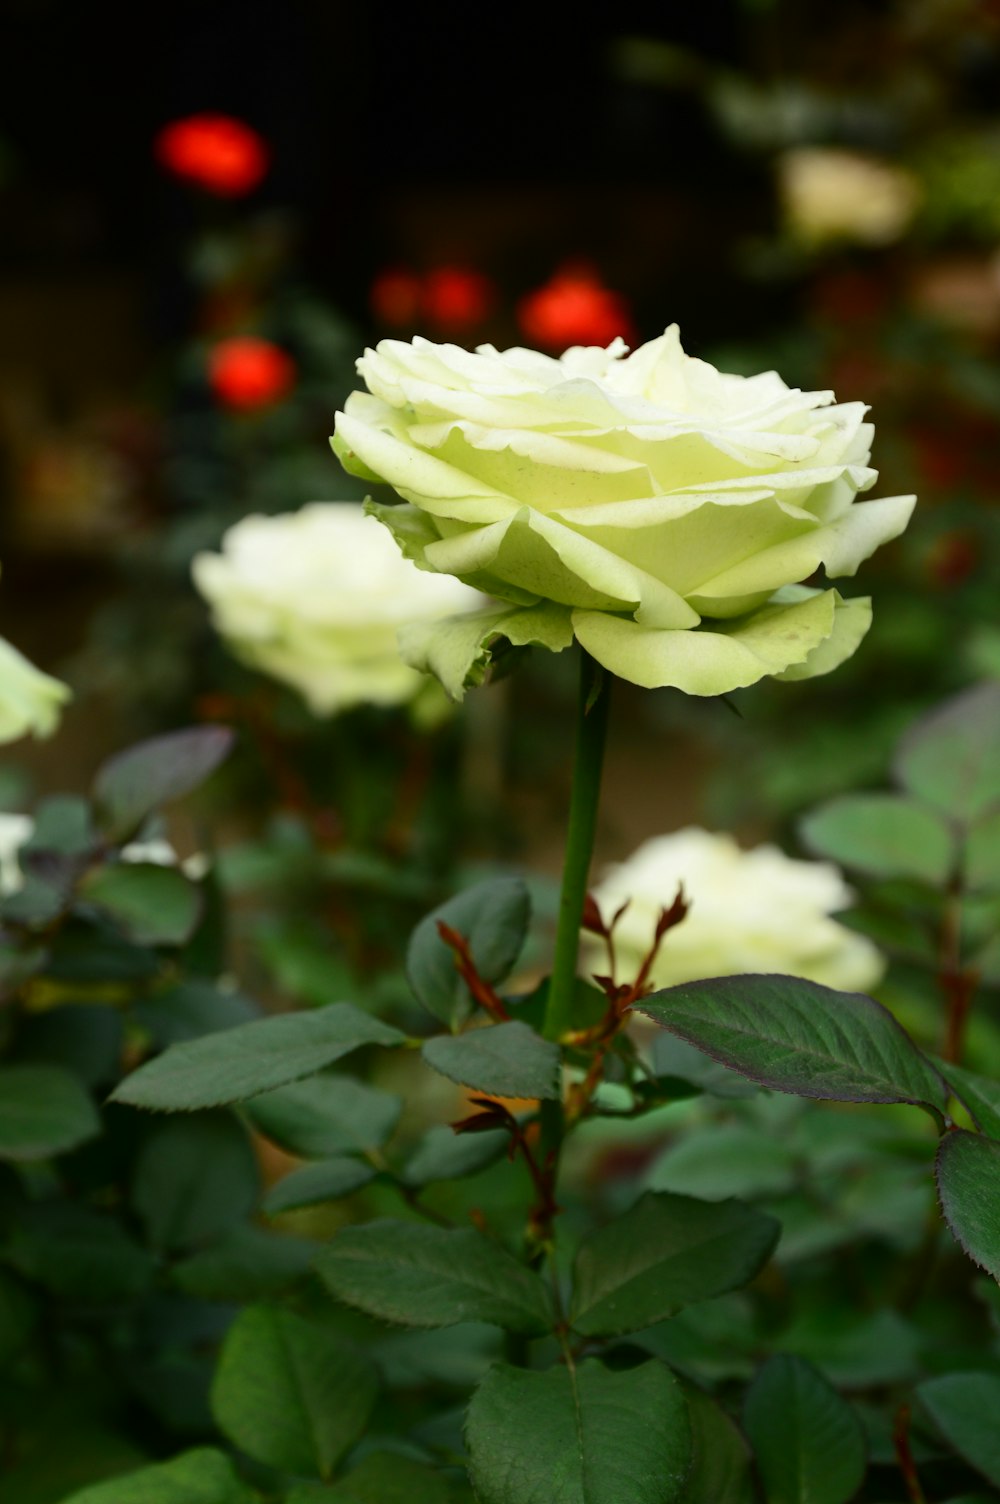 a white rose is blooming in a garden